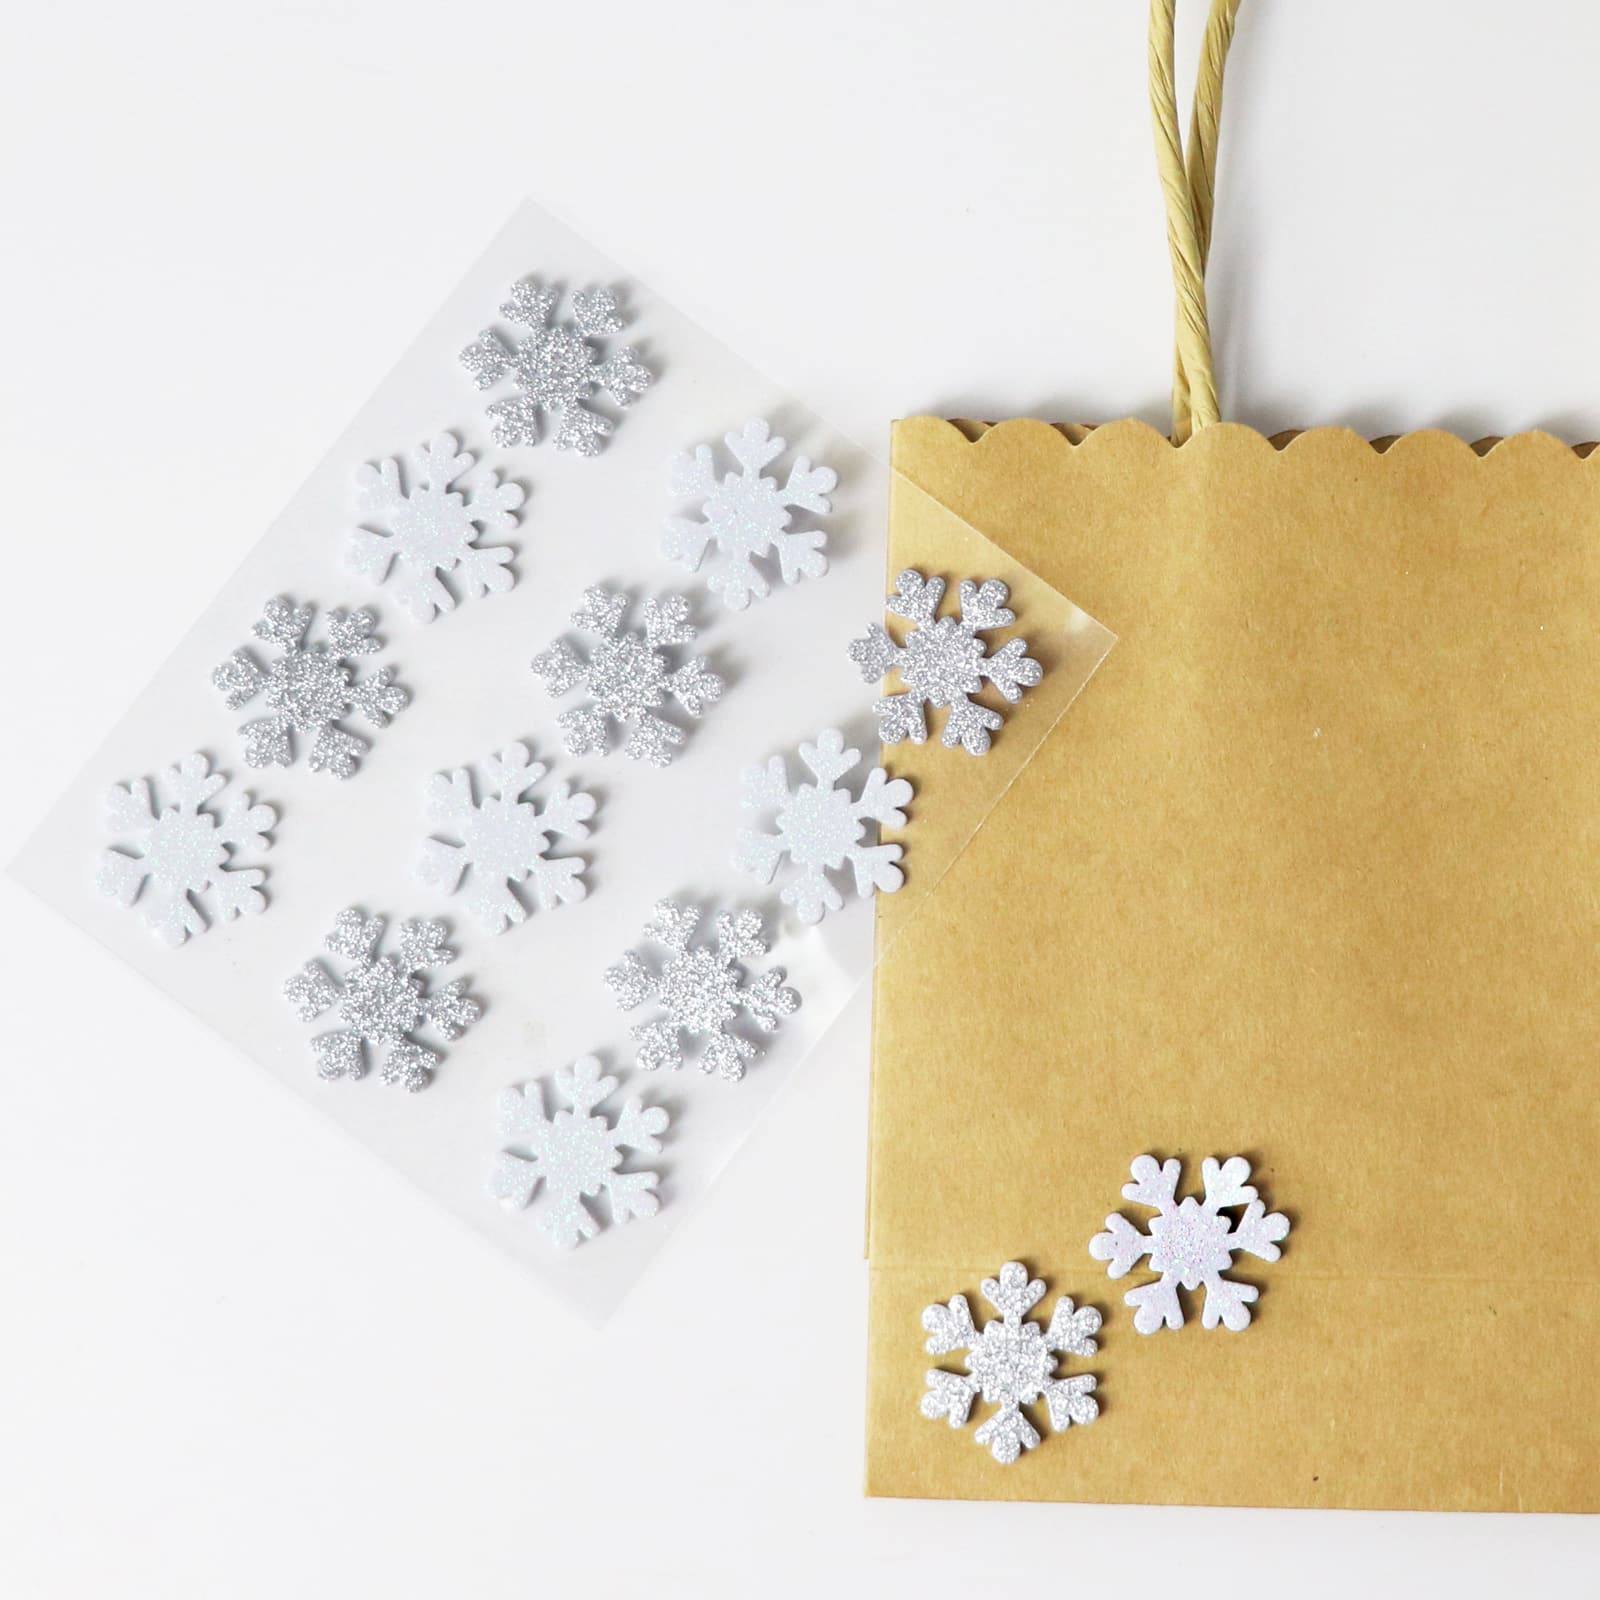 Snowflake Glitter Die Cut Stickers by Recollections™